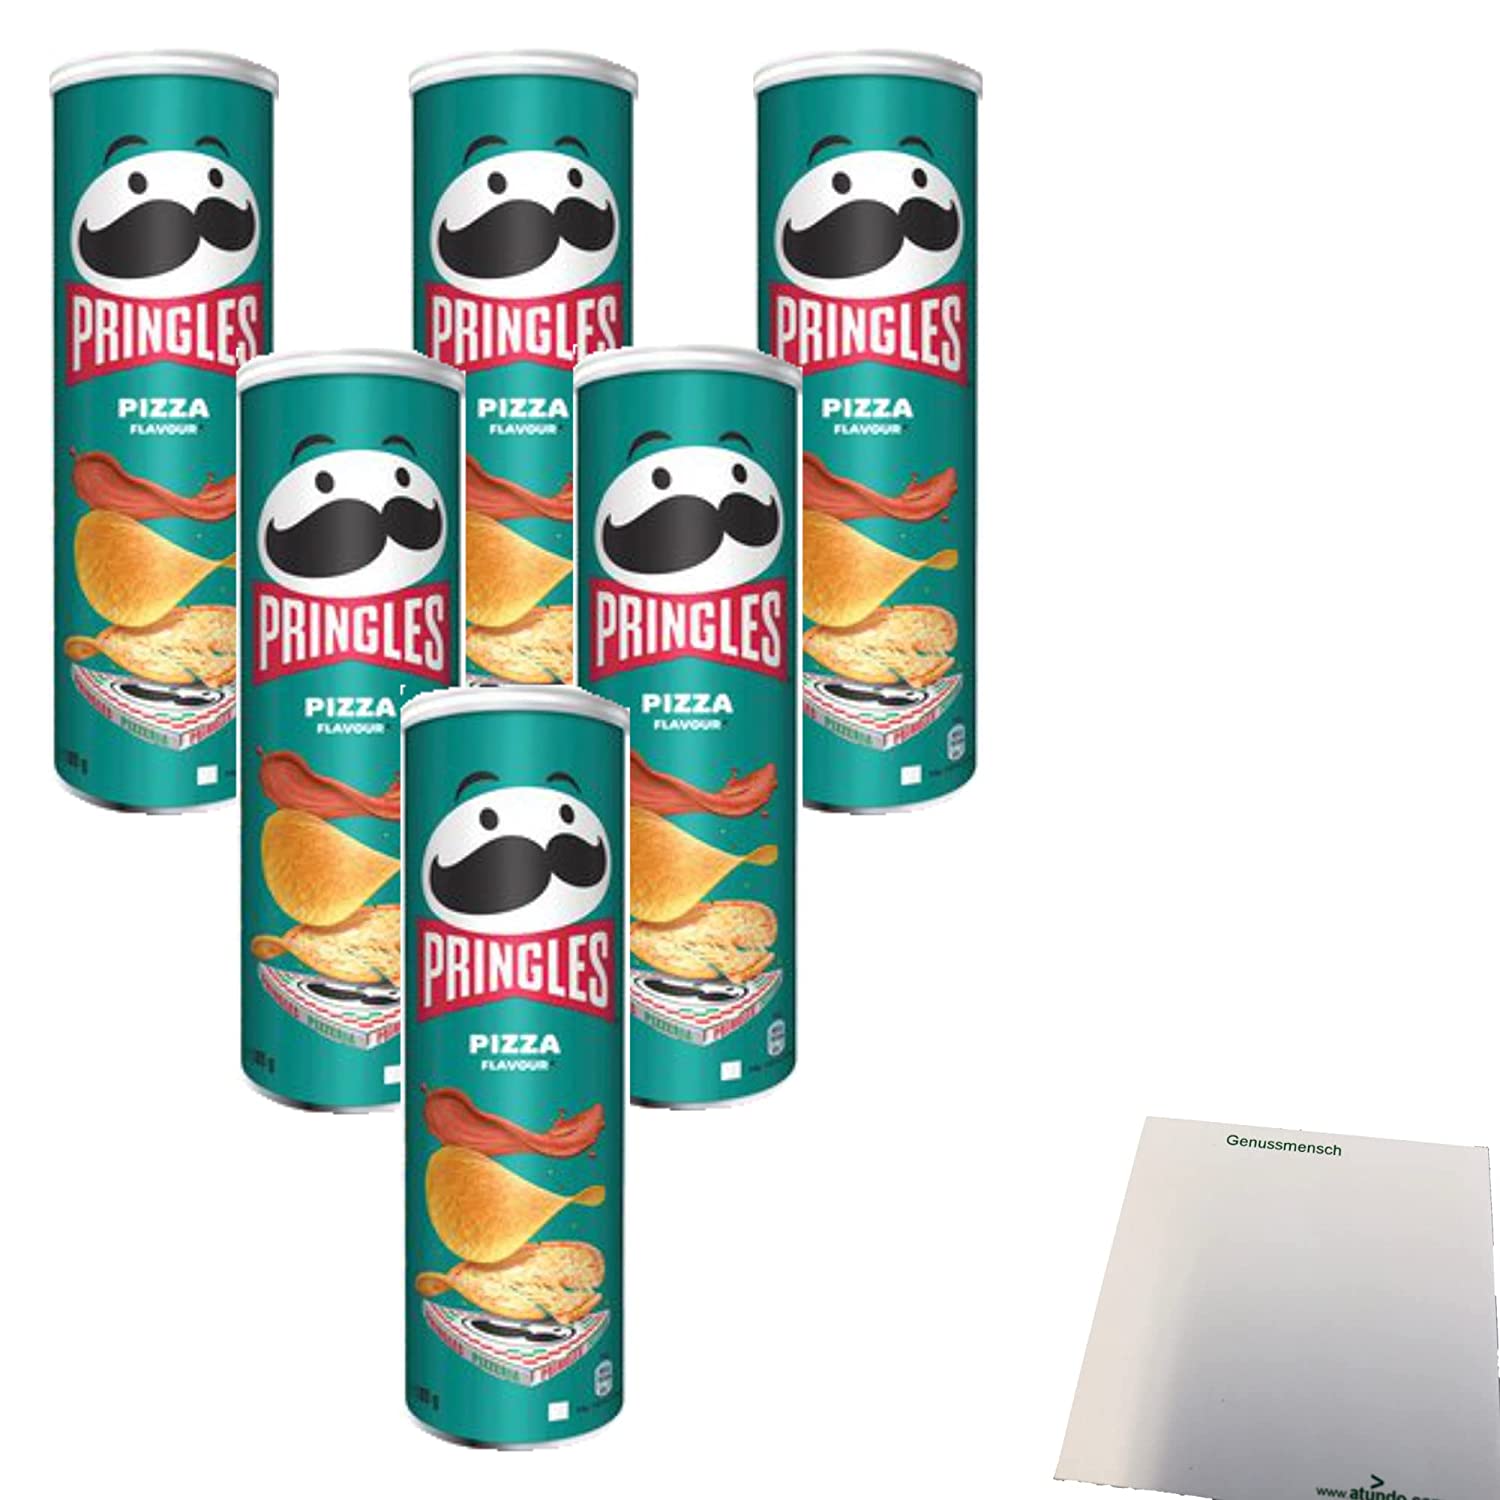 Pringles Pizza Flavour 6er Pack (6x185g Packung) + usy Block